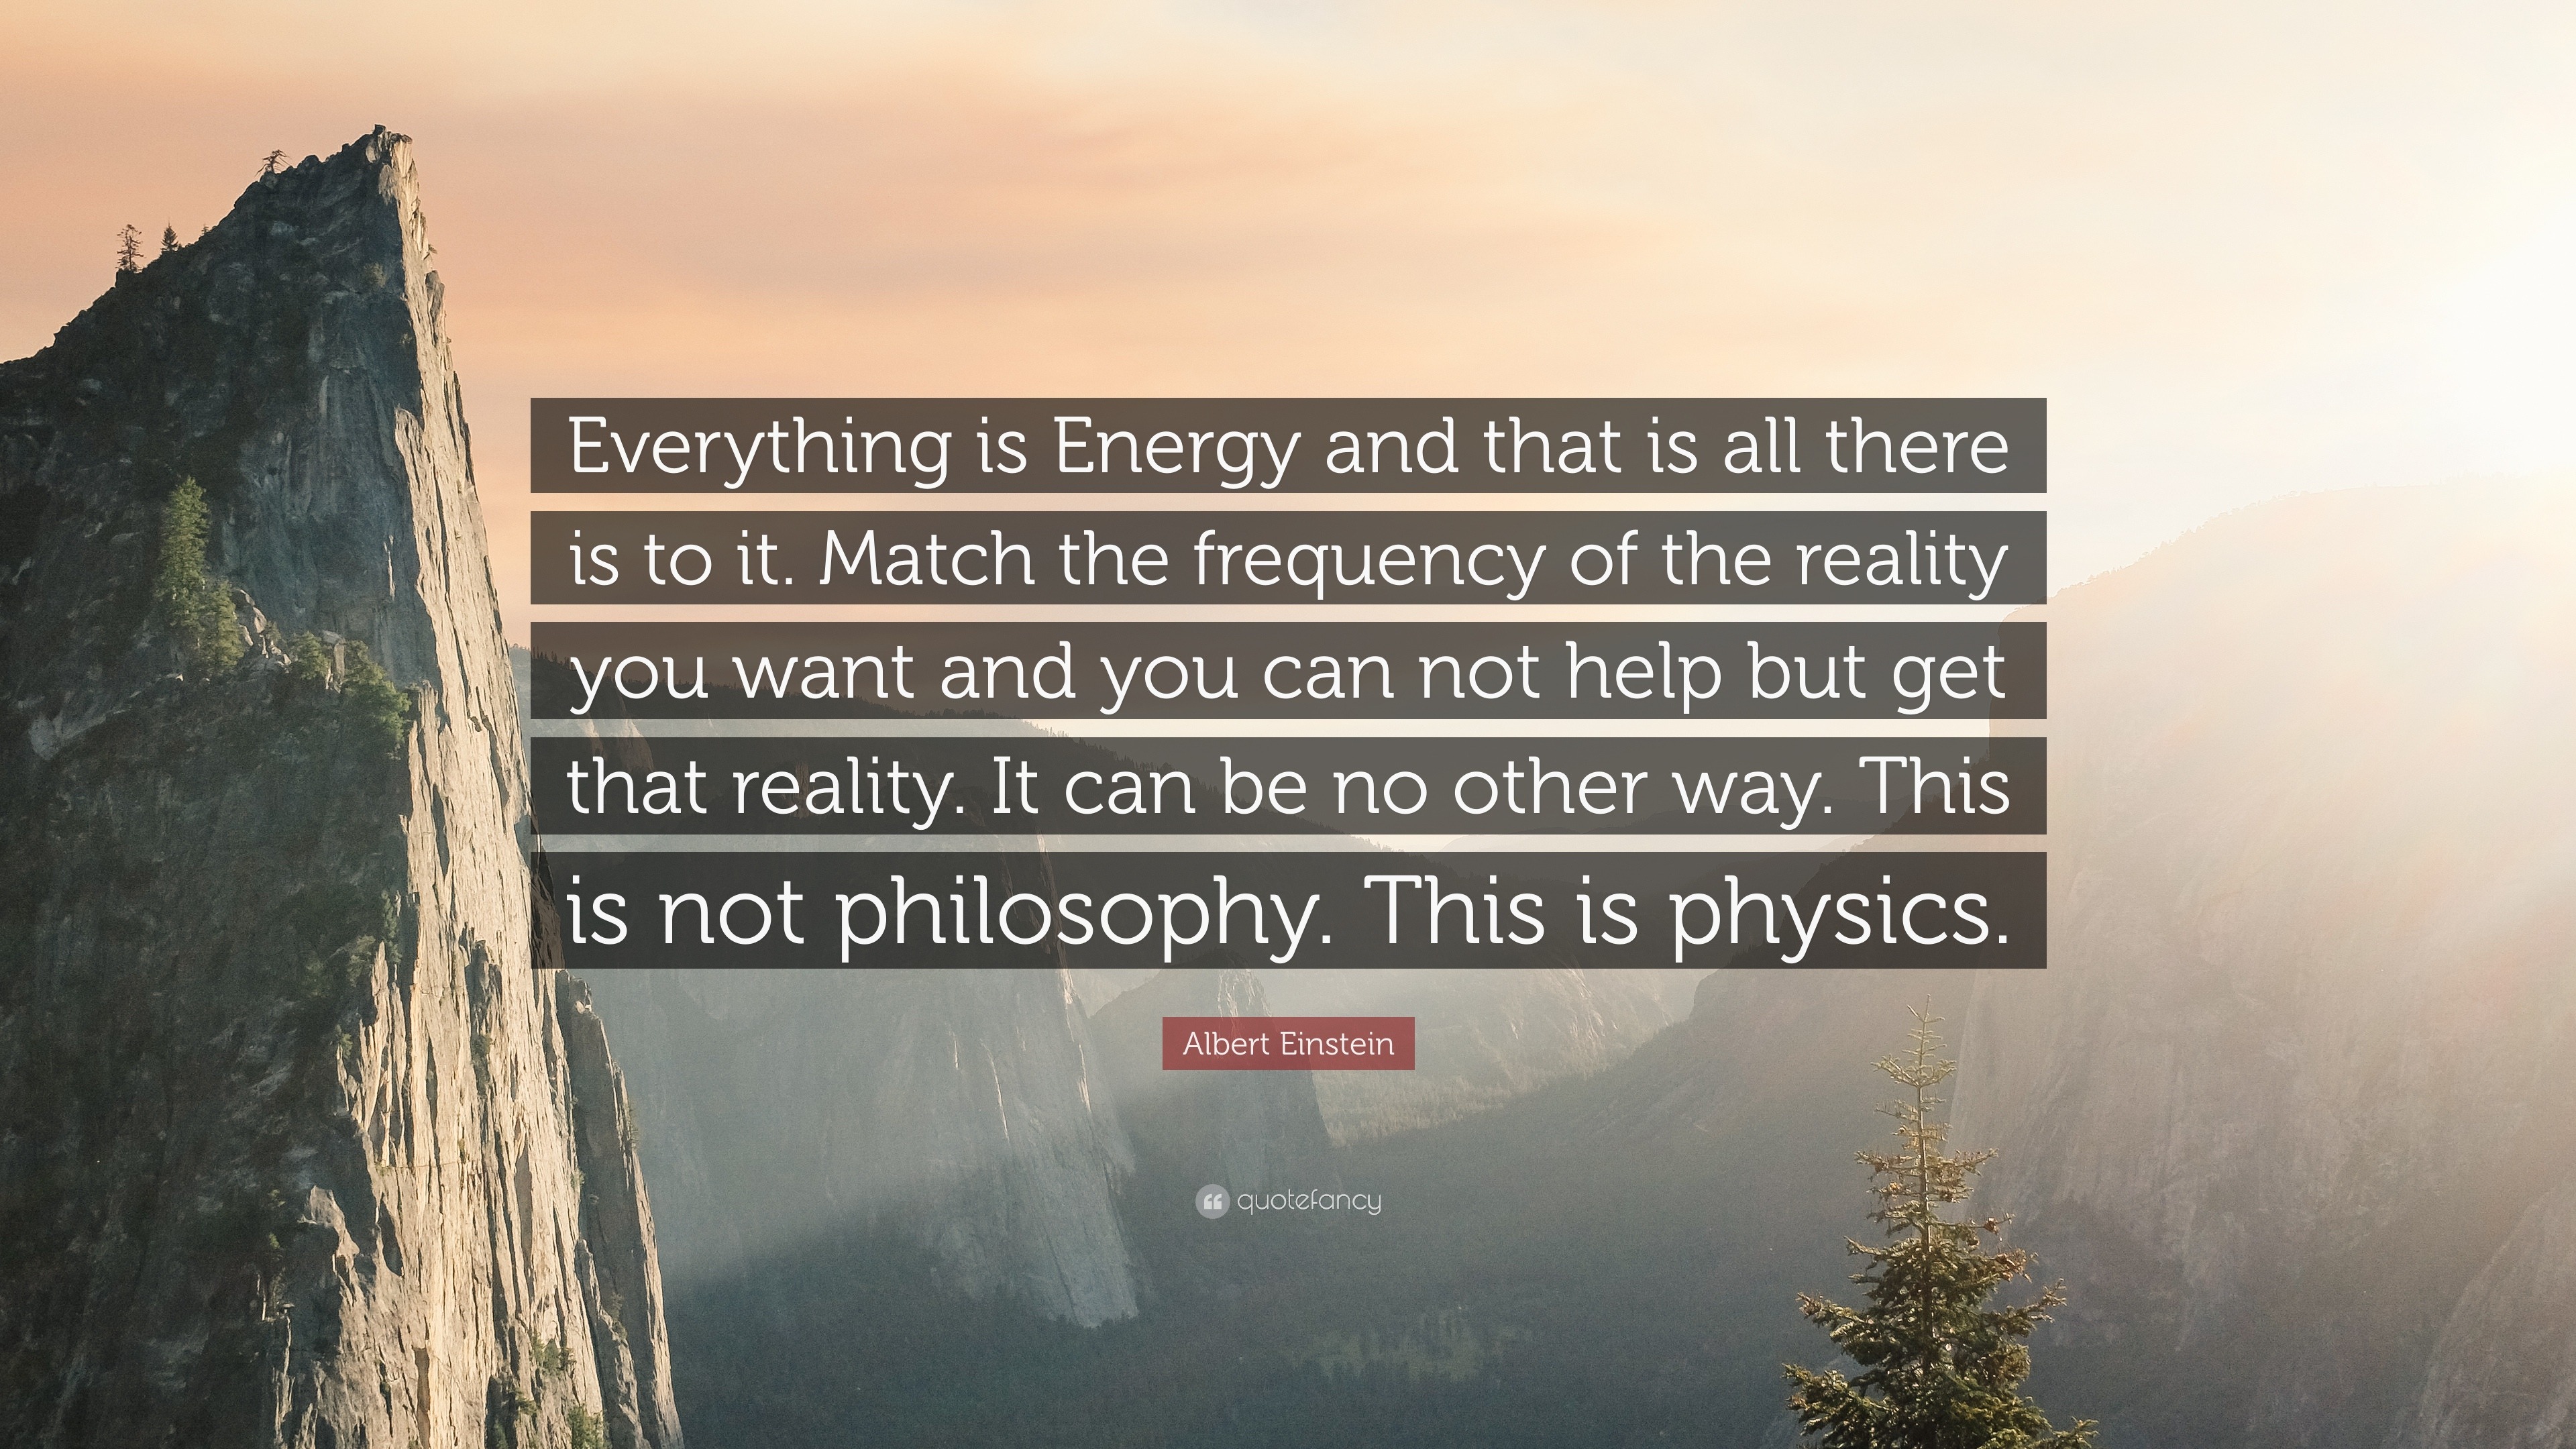 Albert Einstein Quote: “Everything is Energy and that is all there is ...
 Energy Physics Quotes